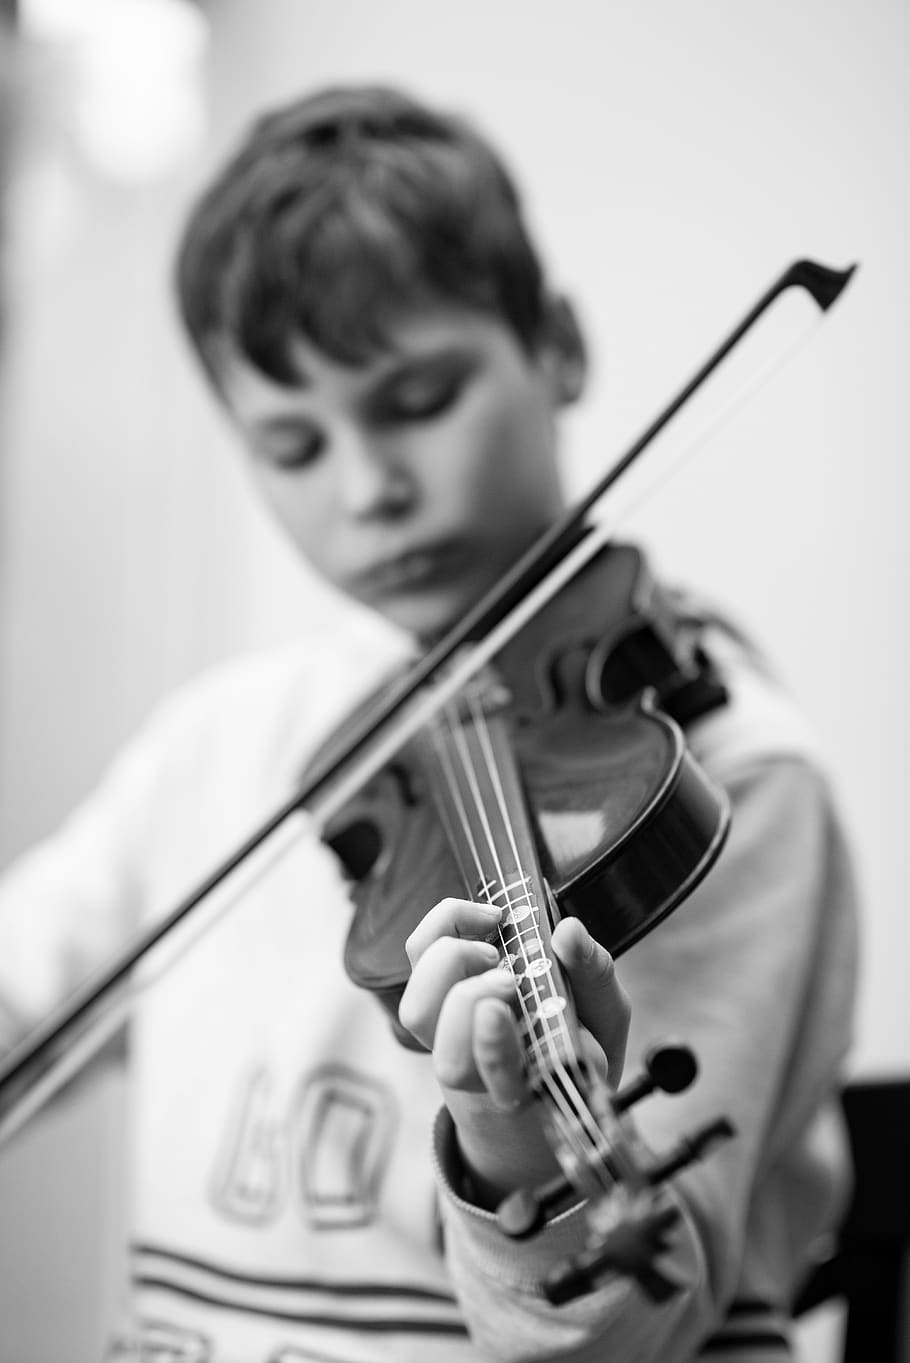 violin, student, music, instrument, learning, classical, young student, boy, playing, string instrument